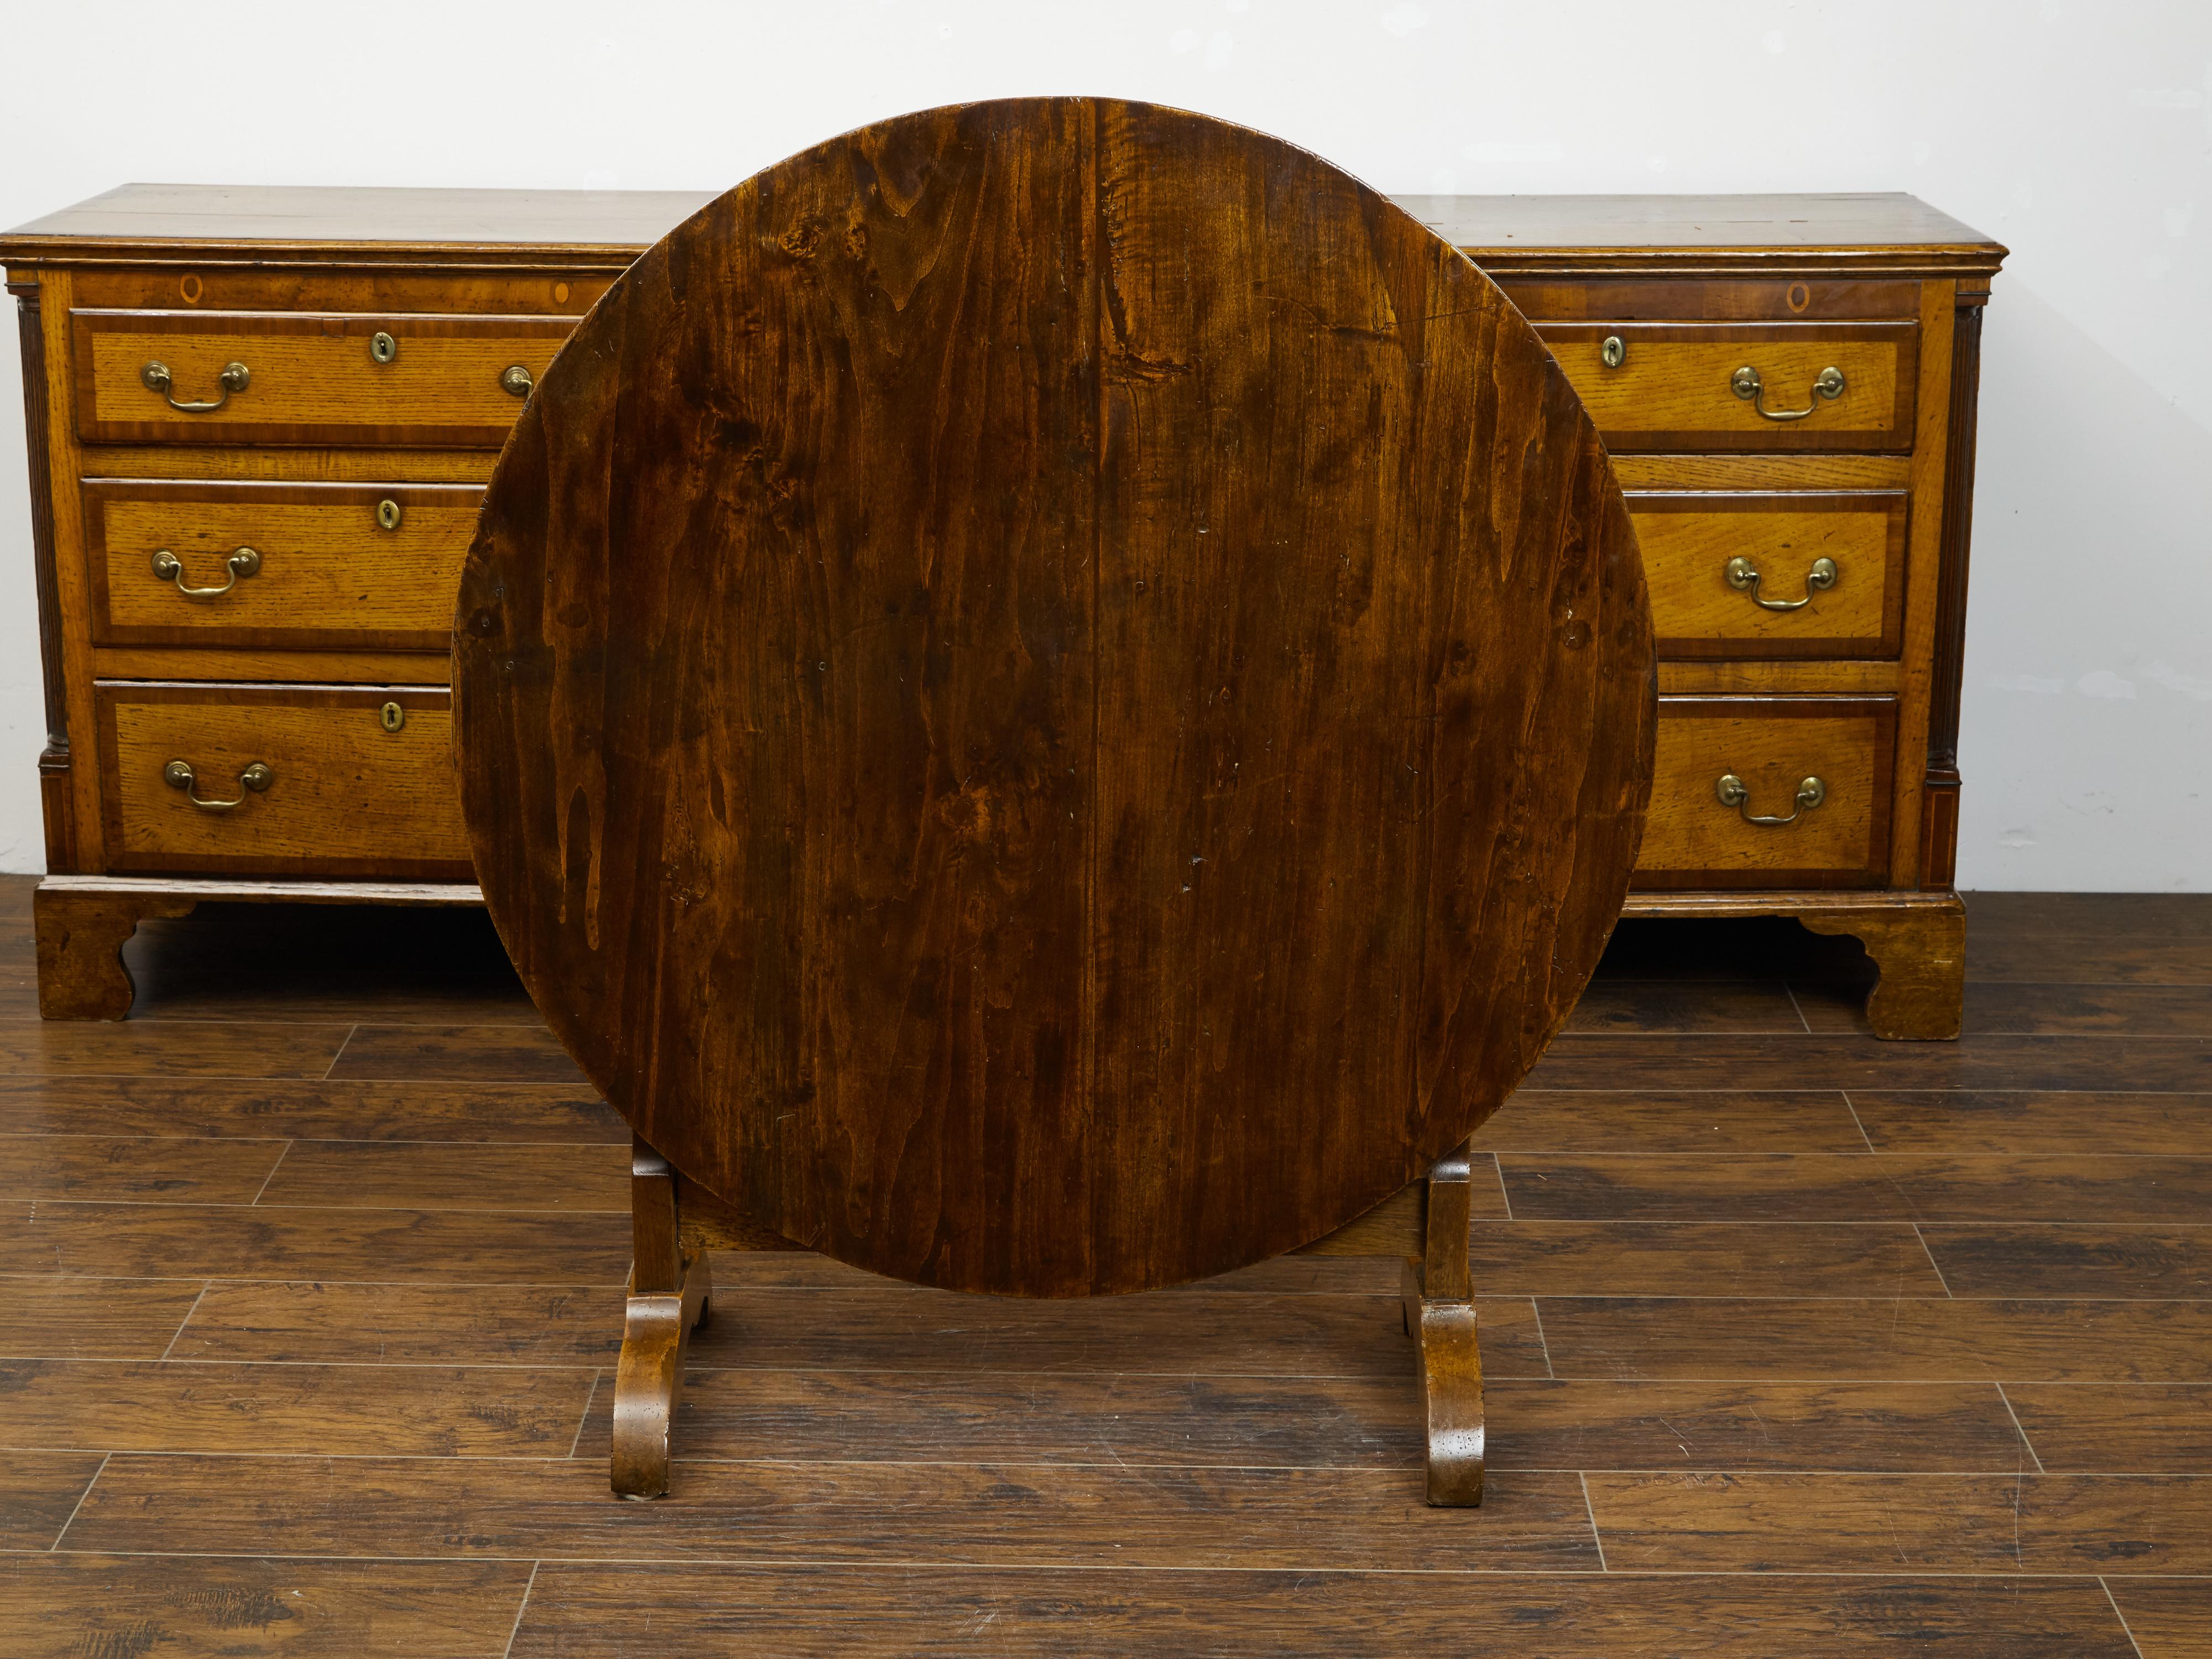 A French pine wine tasting table from the late 19th century, with circular top, trestle base and butterfly wedge. Created in France during the last quarter of the 19th century, this rustic wine tasting table features a round tilt-top supported by a